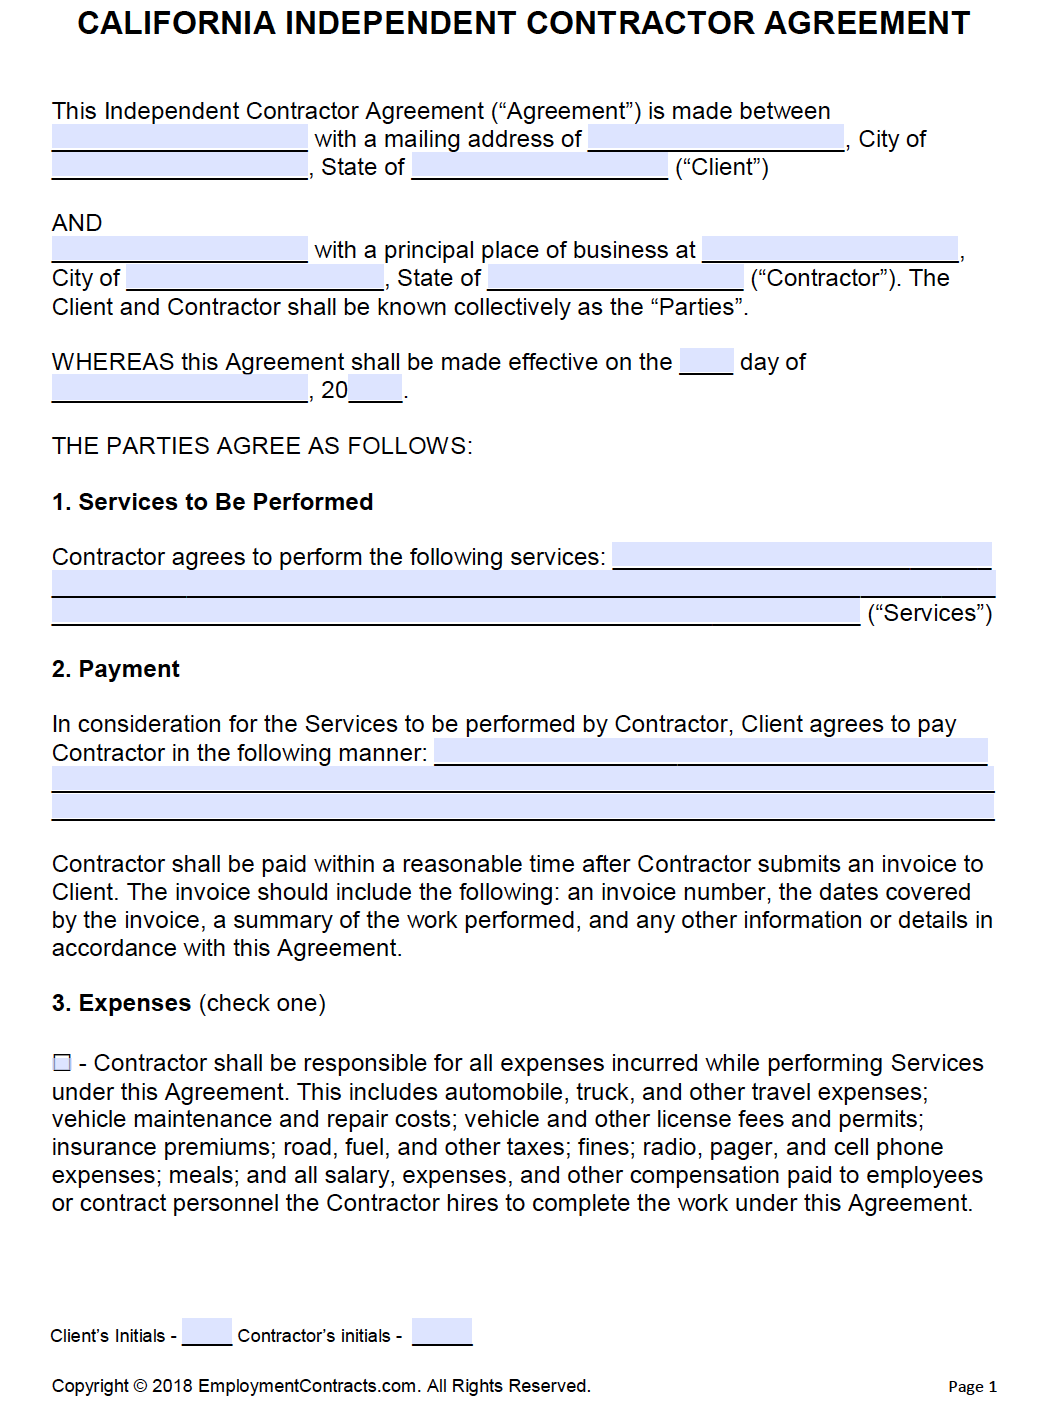 California Independent Contractor Agreement PDF Word